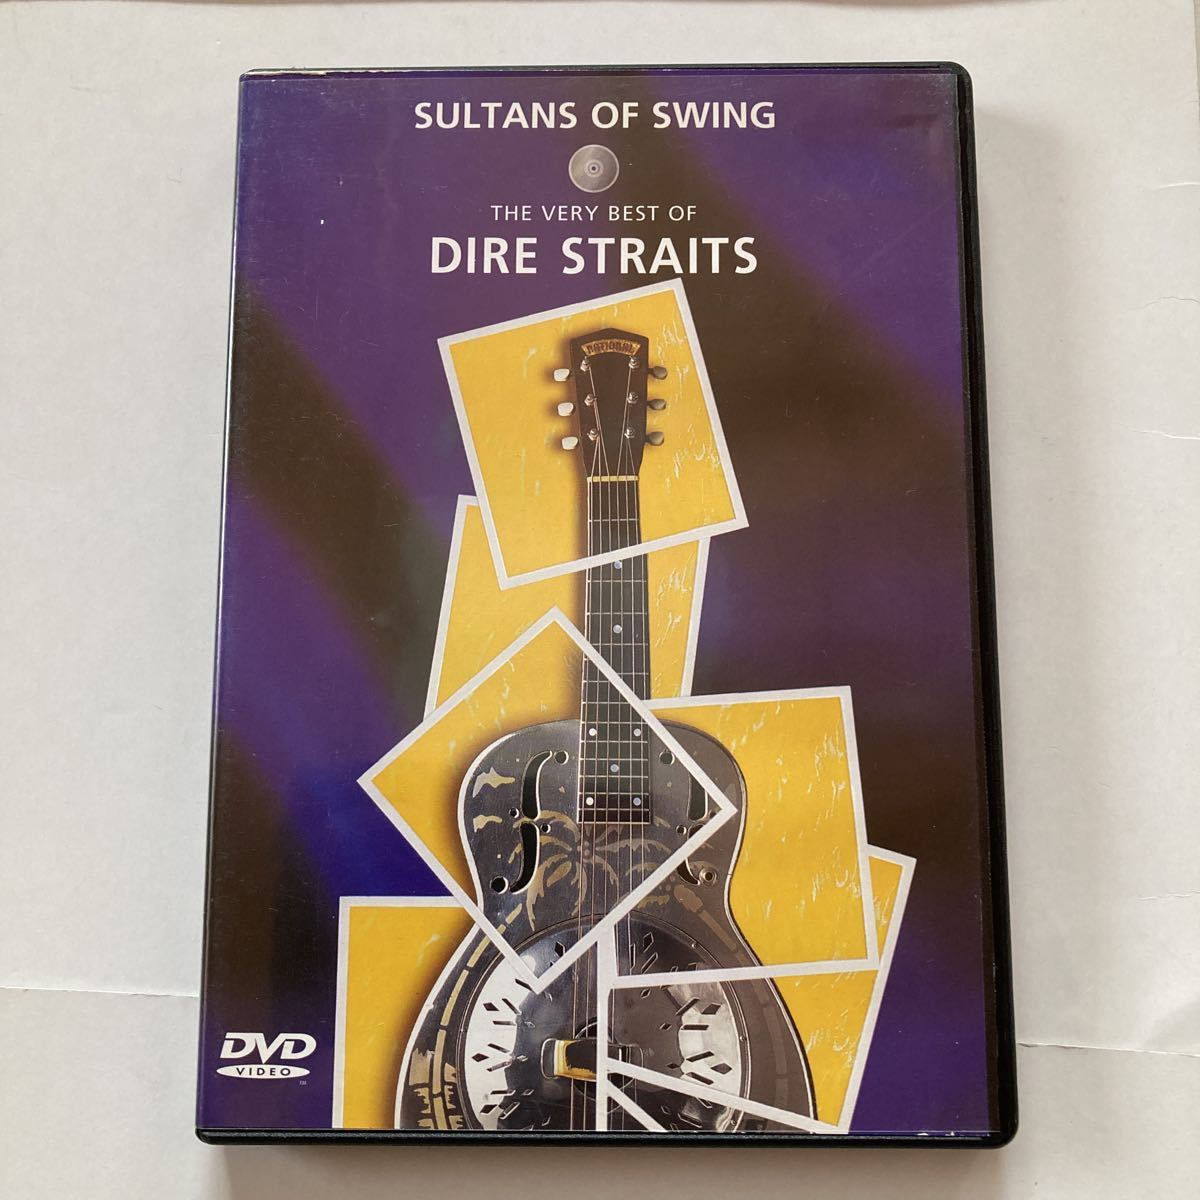 DVD THE VERY BEST OF Dire Straits Sultans of Swing ダイアー・ストレイツ マーク・ノップラー MONEY FOR NOTHING BROTHERS IN ARMS_画像1